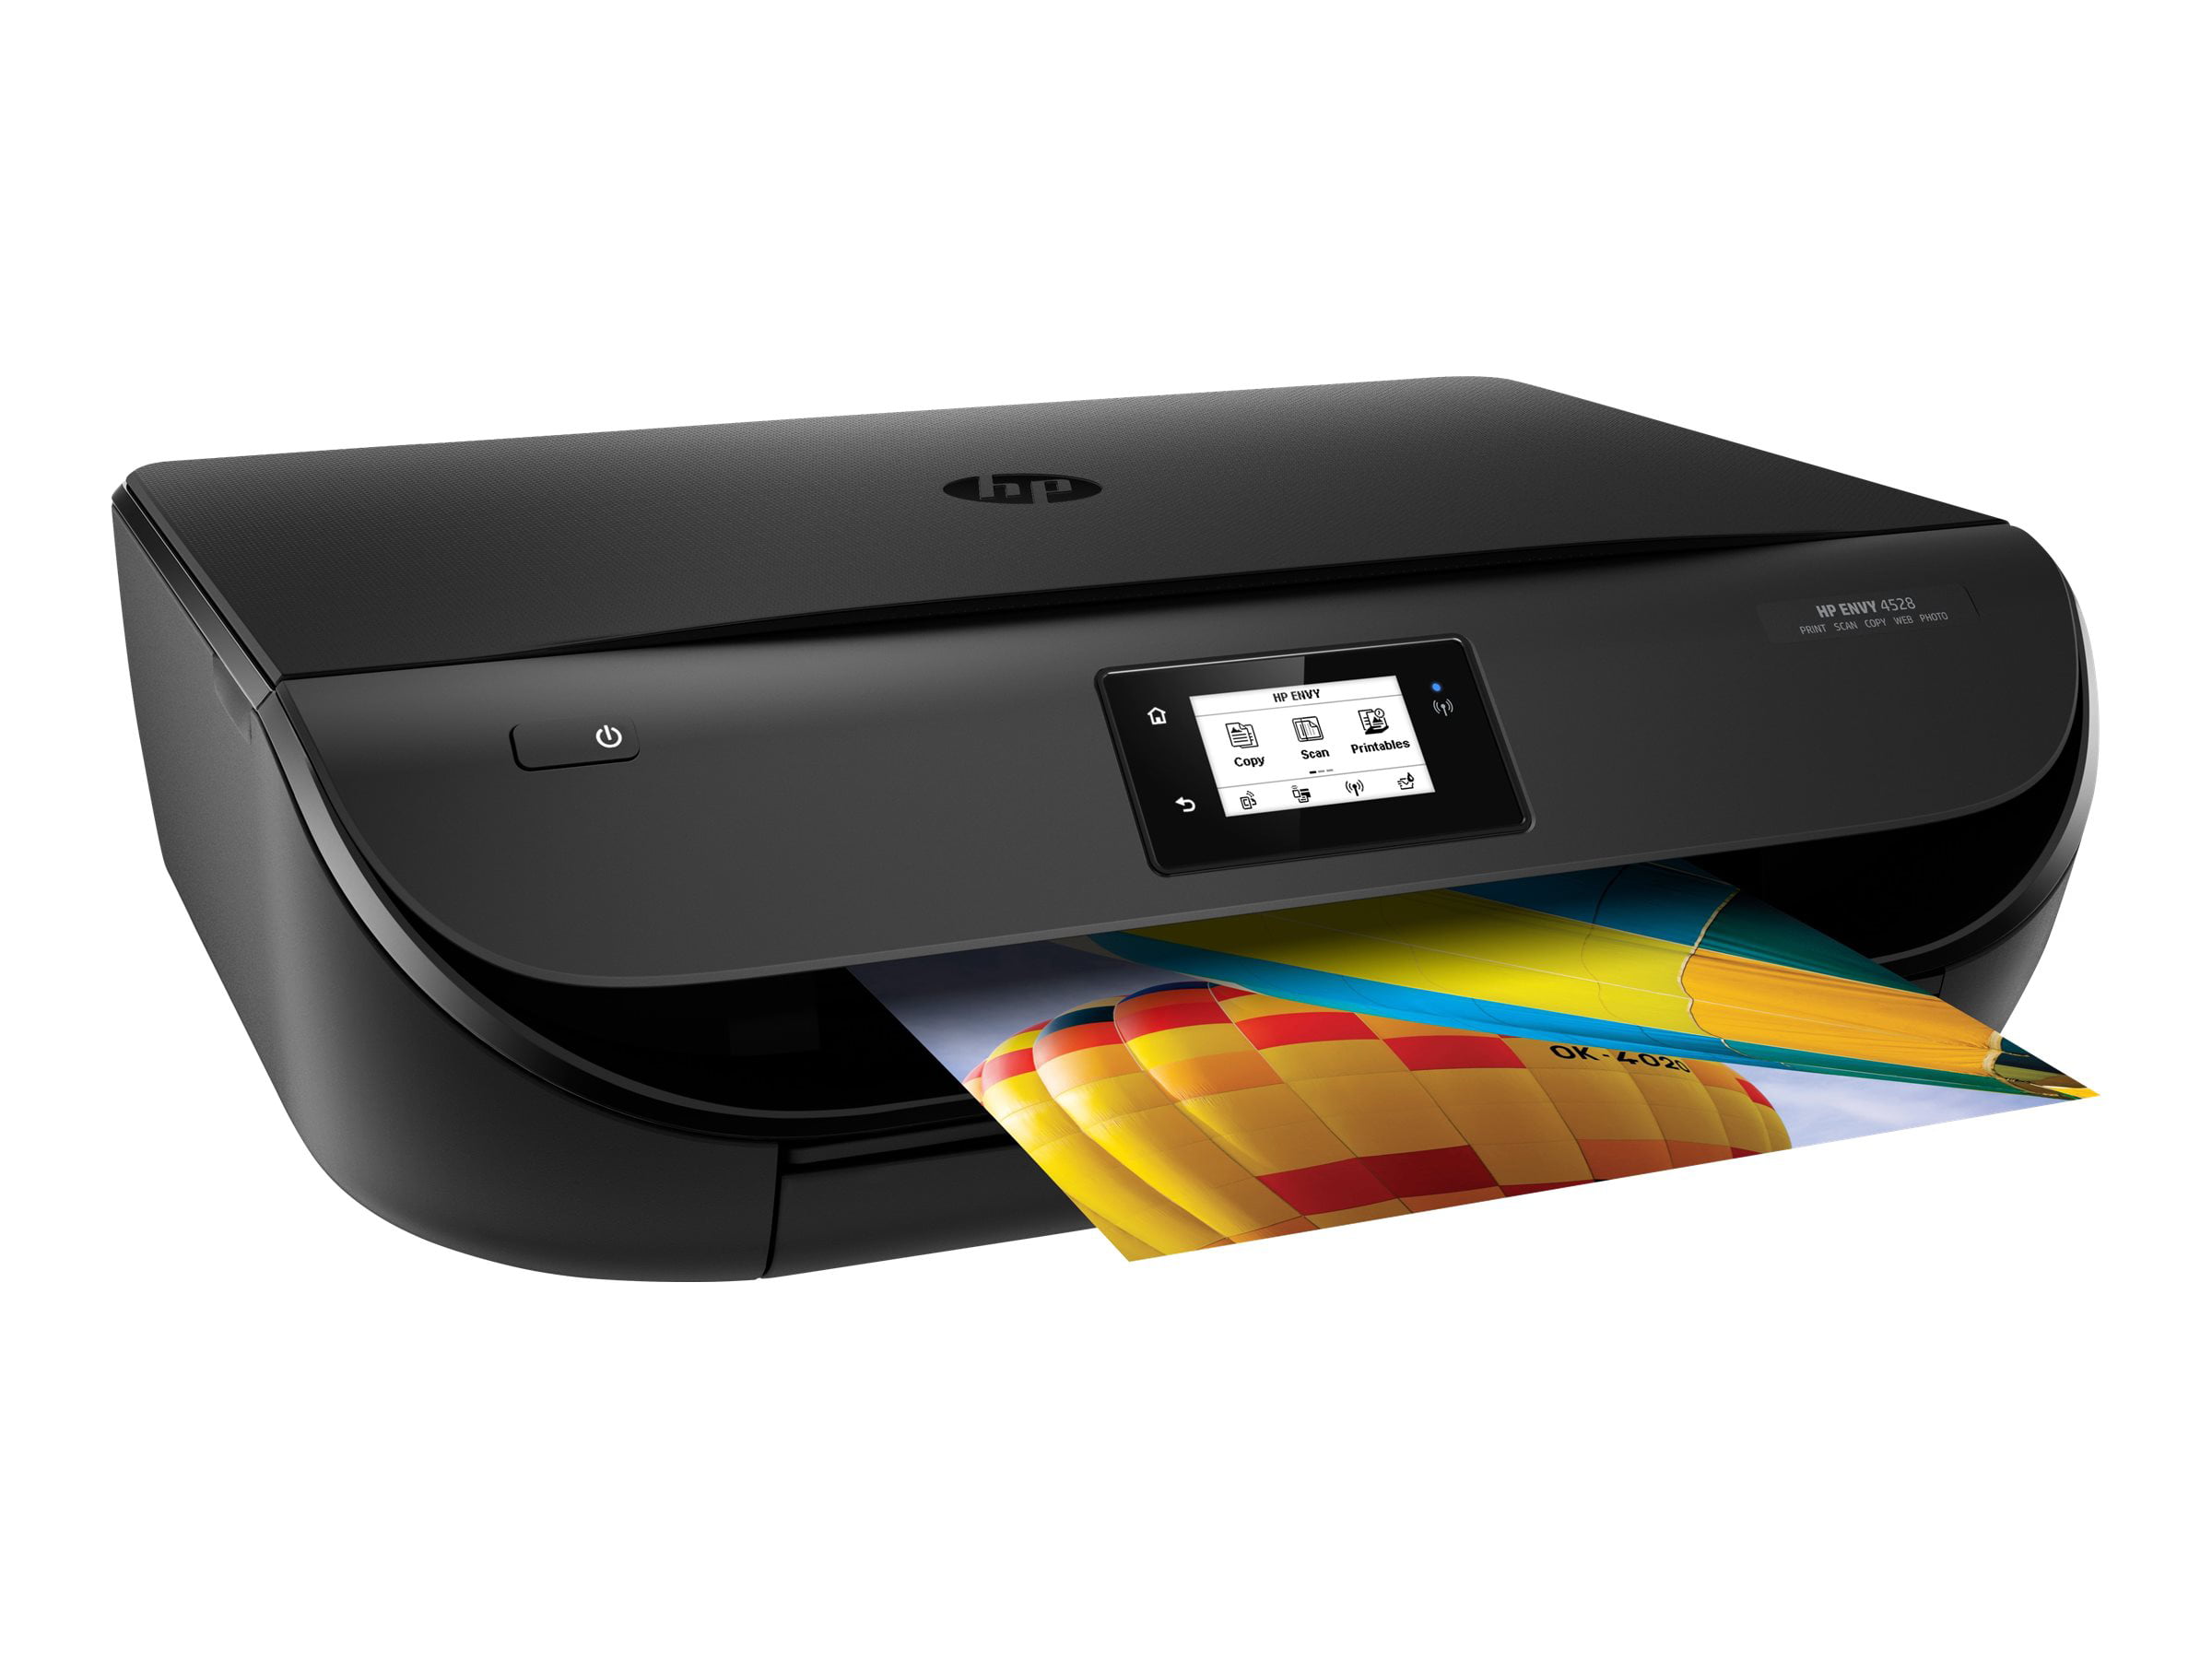 HP ENVY 4524 All-in-One - Multifunction printer - color ink-jet - 8.5 in x 11.7 in (original) - A4/Legal (media) - up to 7.5 ppm (copying) - up to 9.5 ppm (